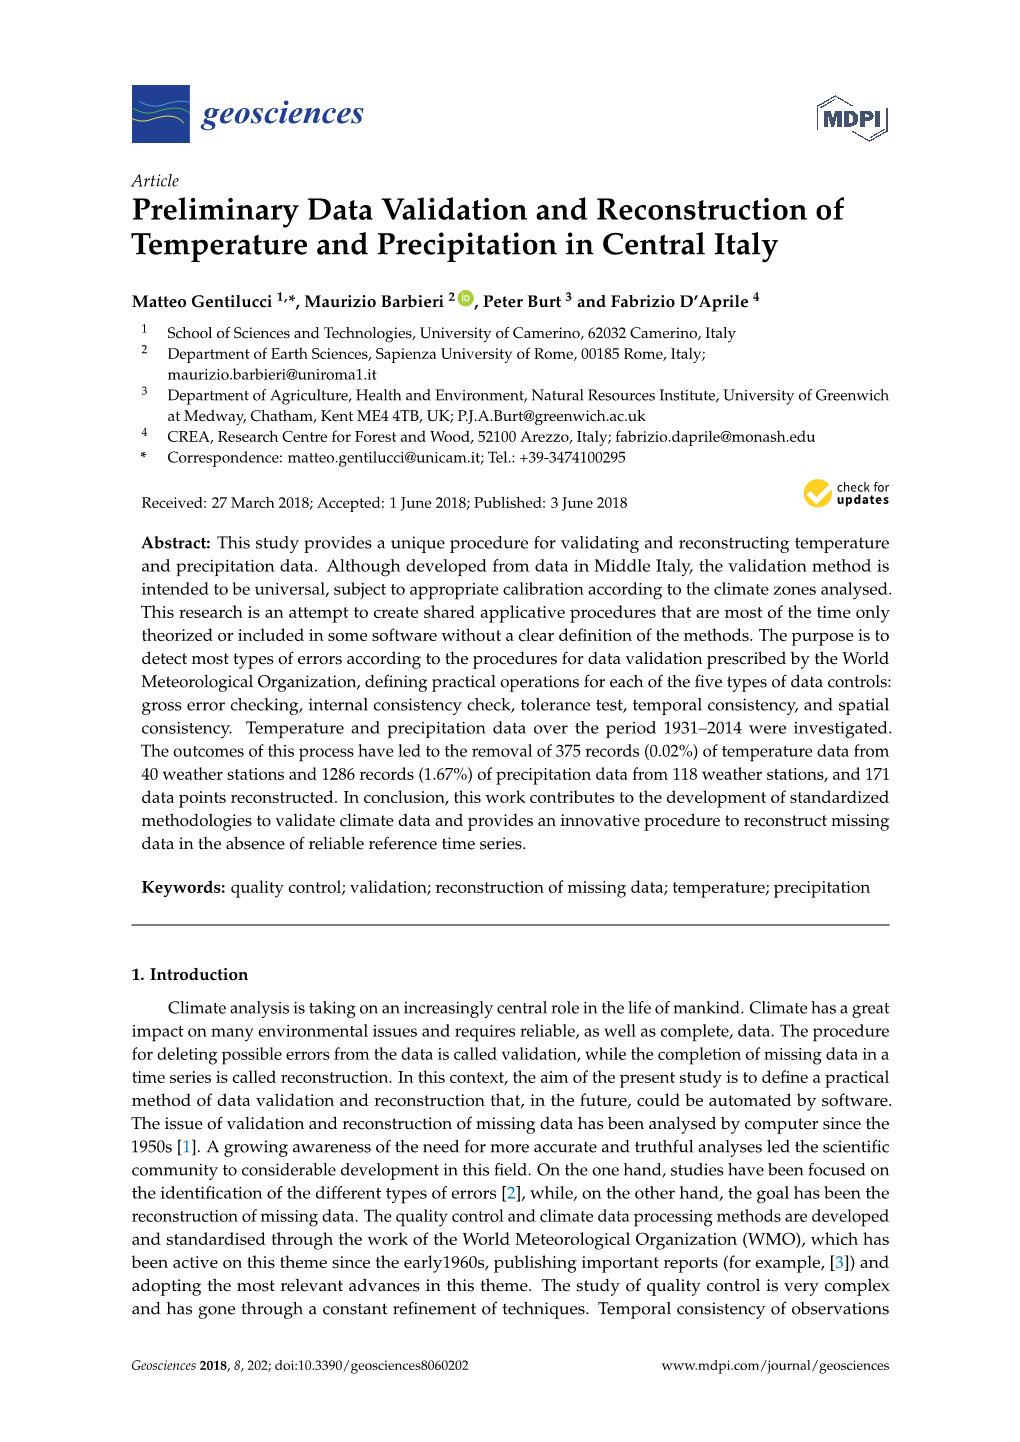 Preliminary Data Validation and Reconstruction of Temperature and Precipitation in Central Italy